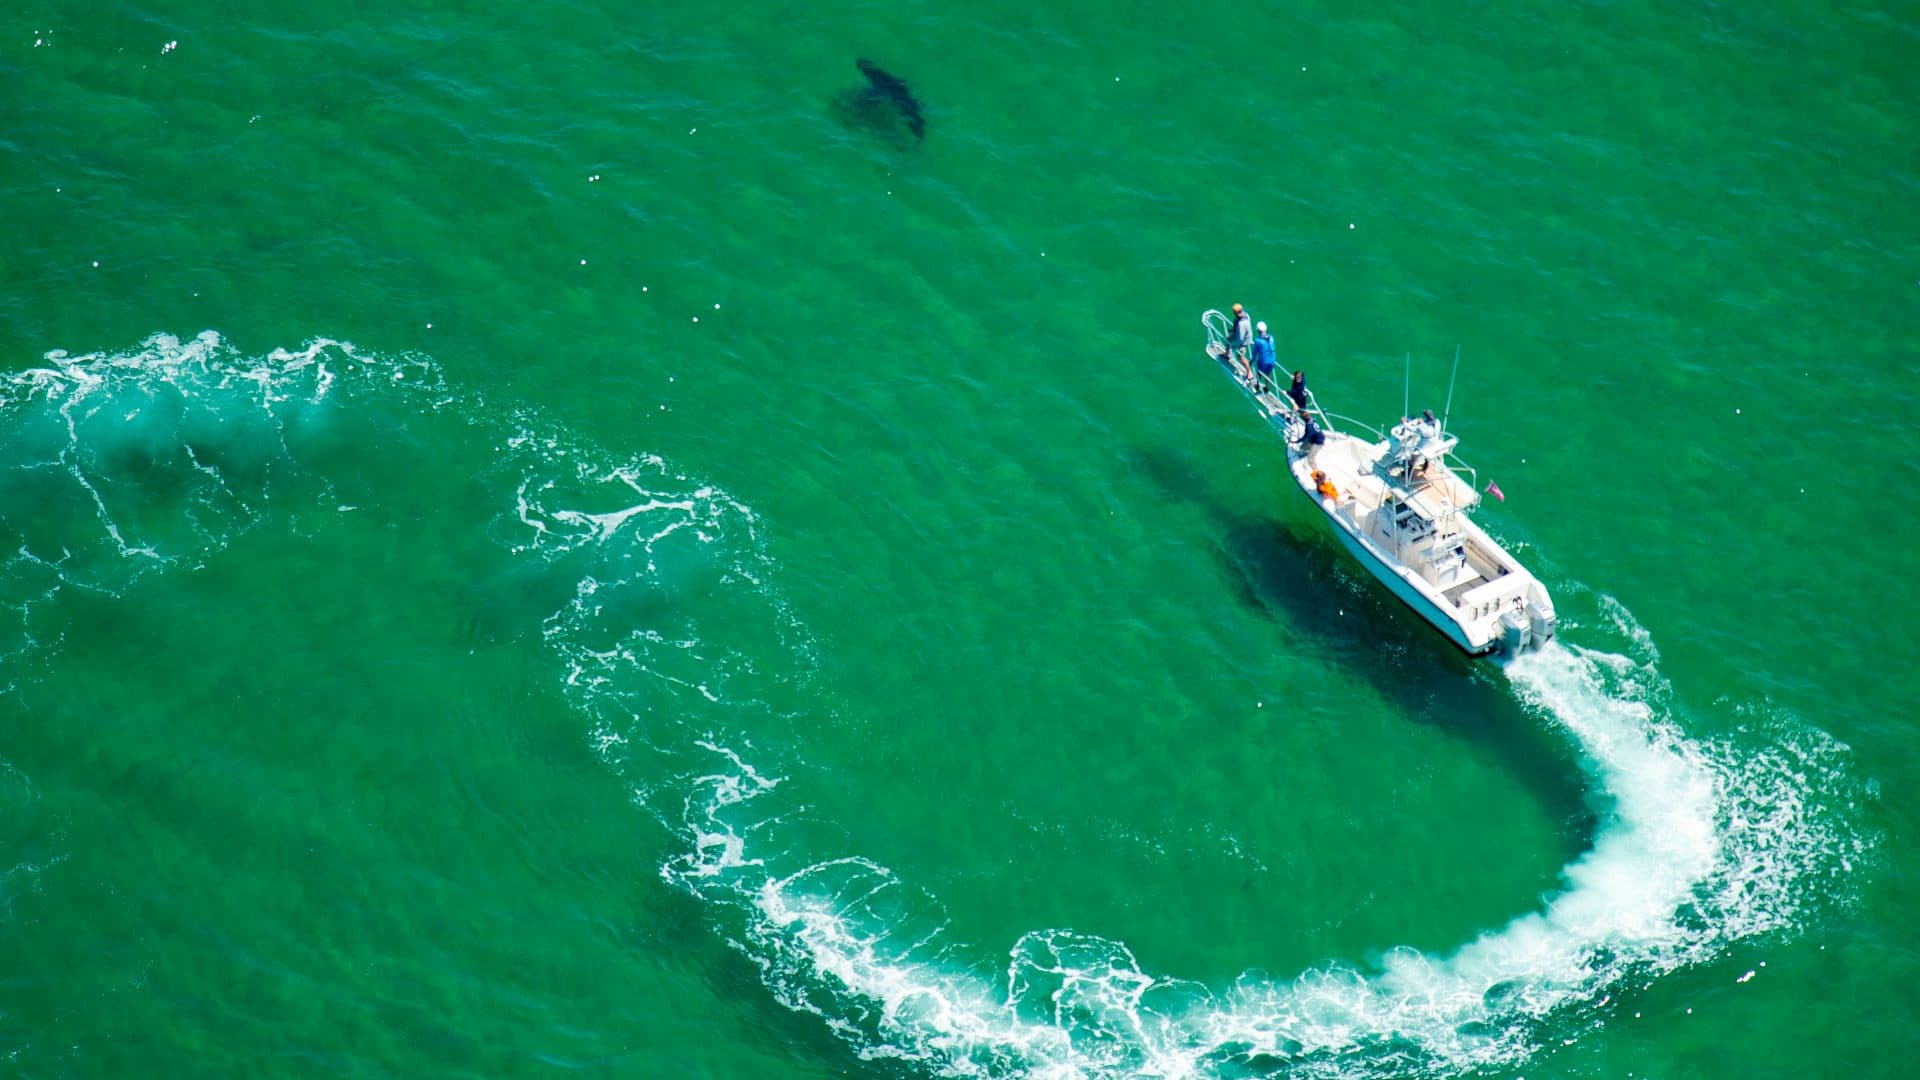 An Atlantic White Shark Conservancy boat and crew work to tag a great white shark in the waters off the shore in Cape Cod, Massachusetts on July 13, 2019.